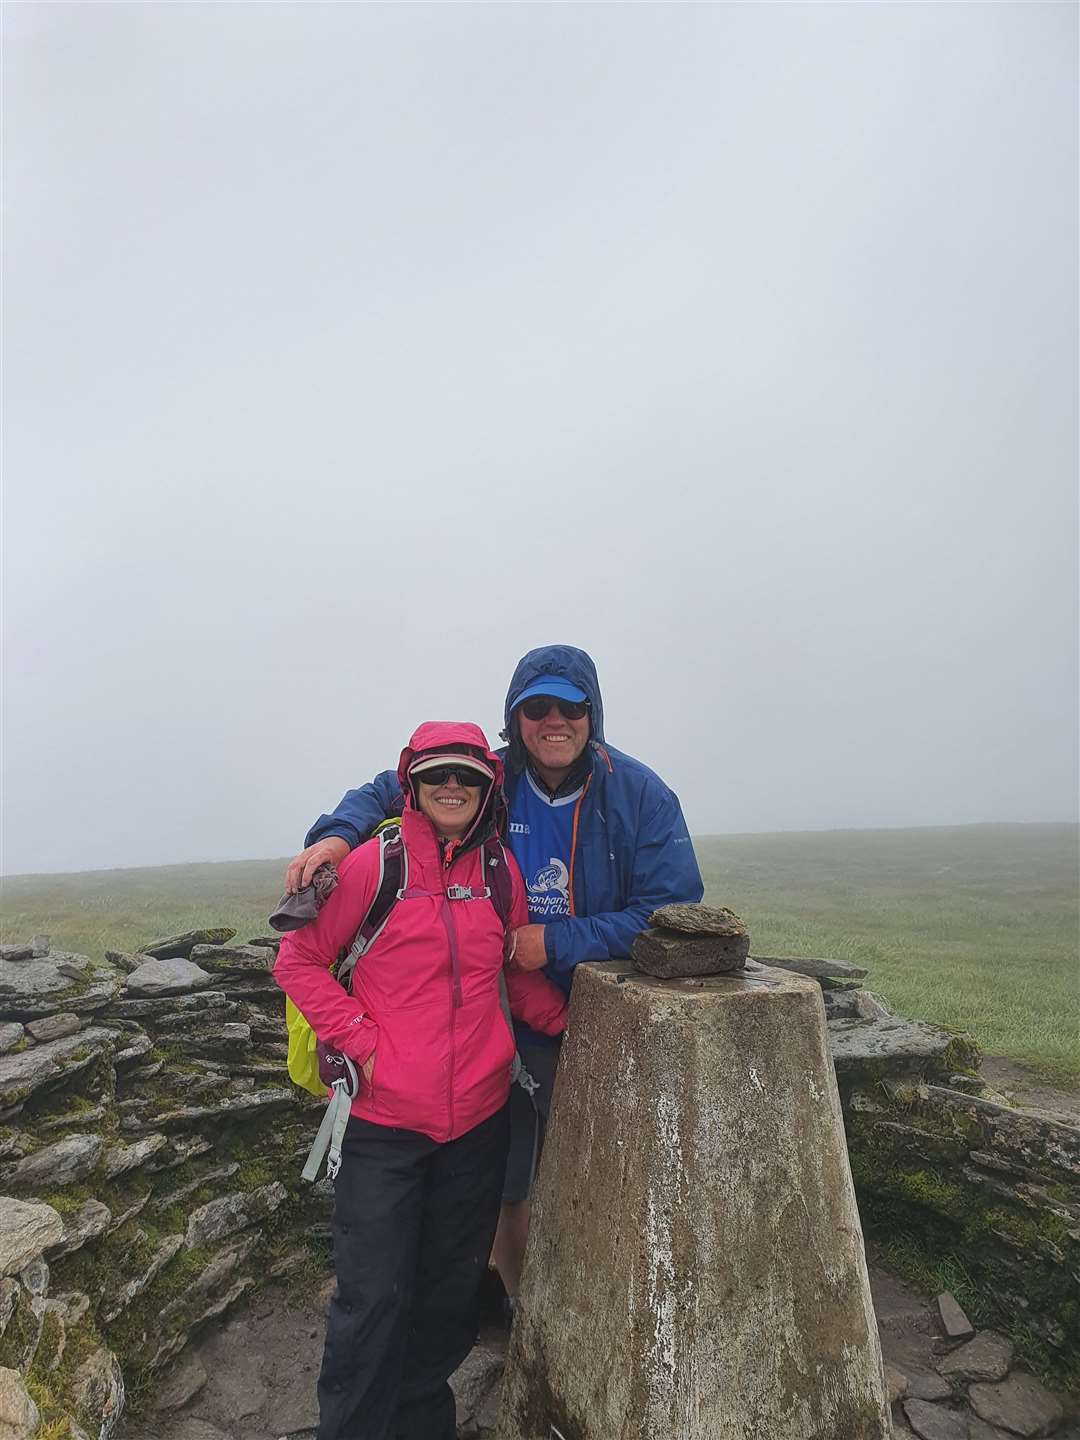 Chris and Donna celebrate their first Munro on Ben Wyvis.